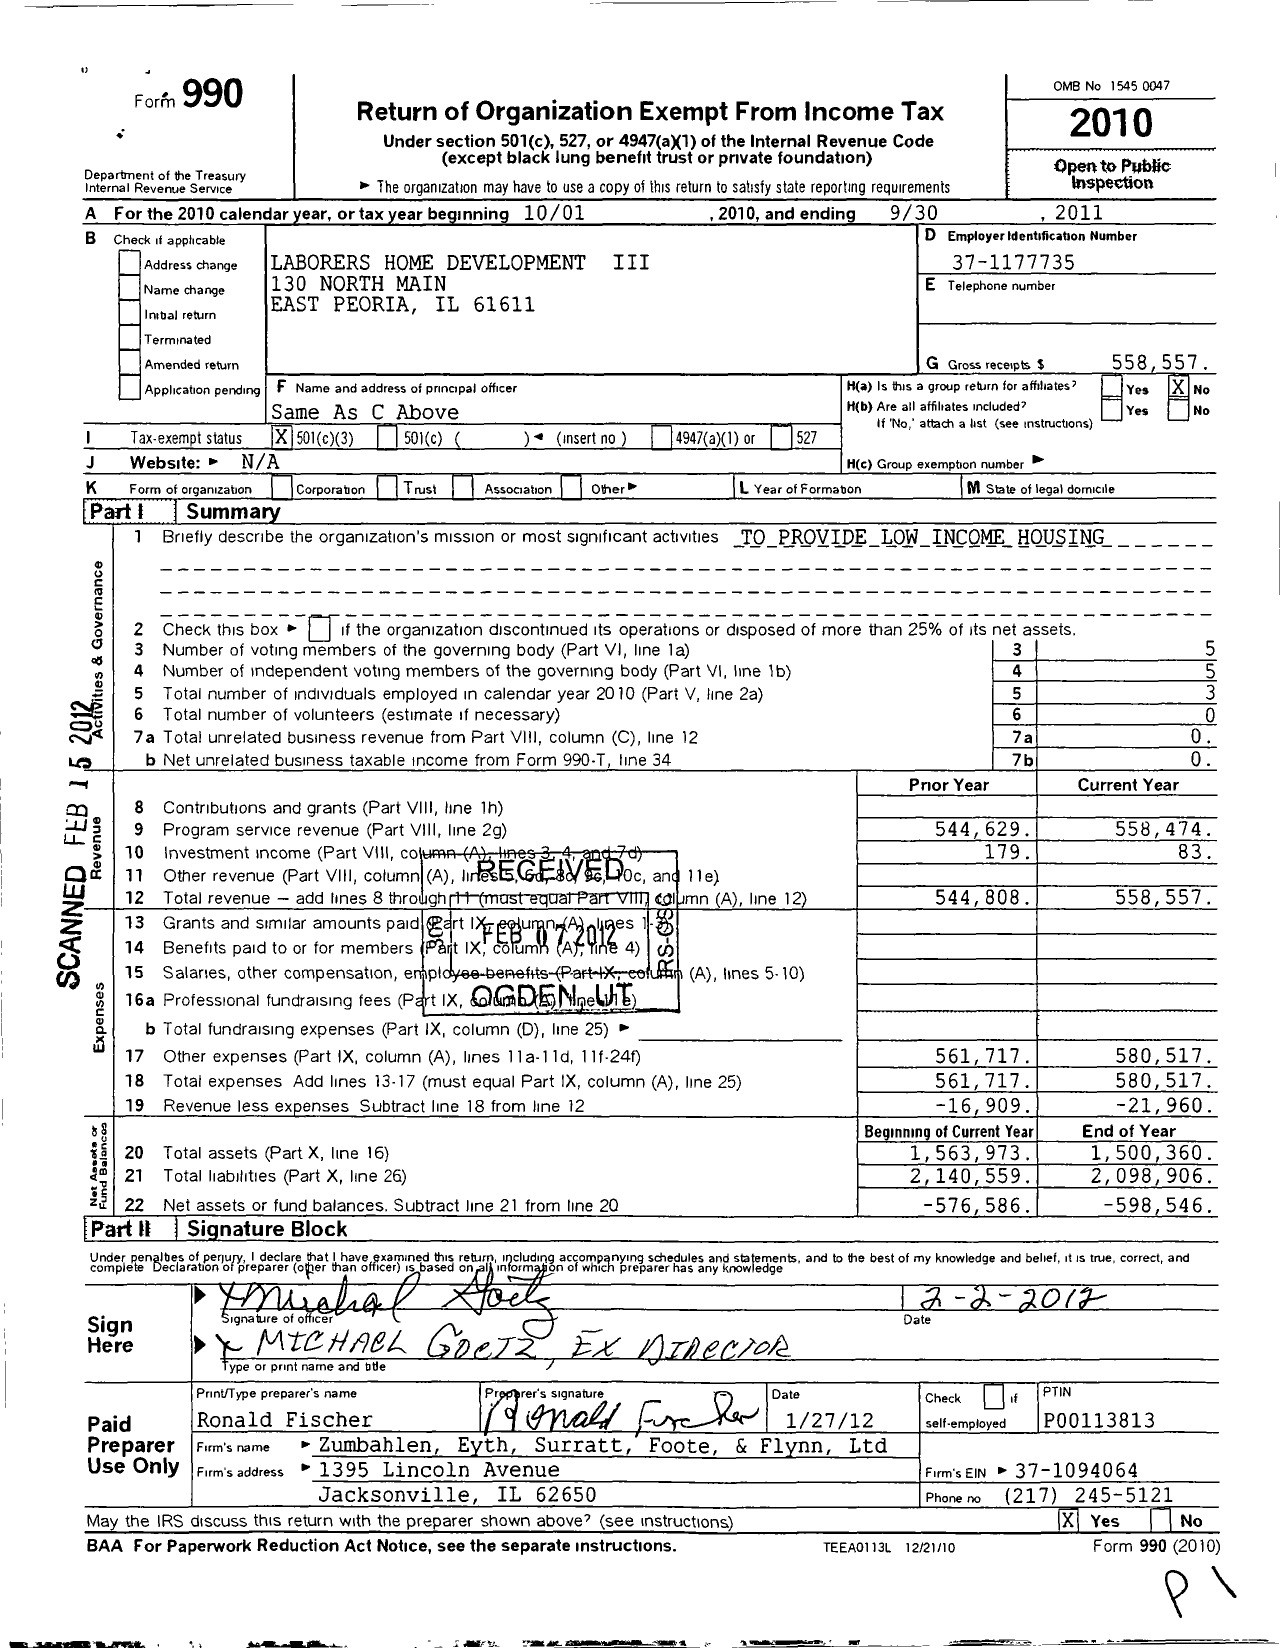 Image of first page of 2010 Form 990 for Laborers Home Development Iii